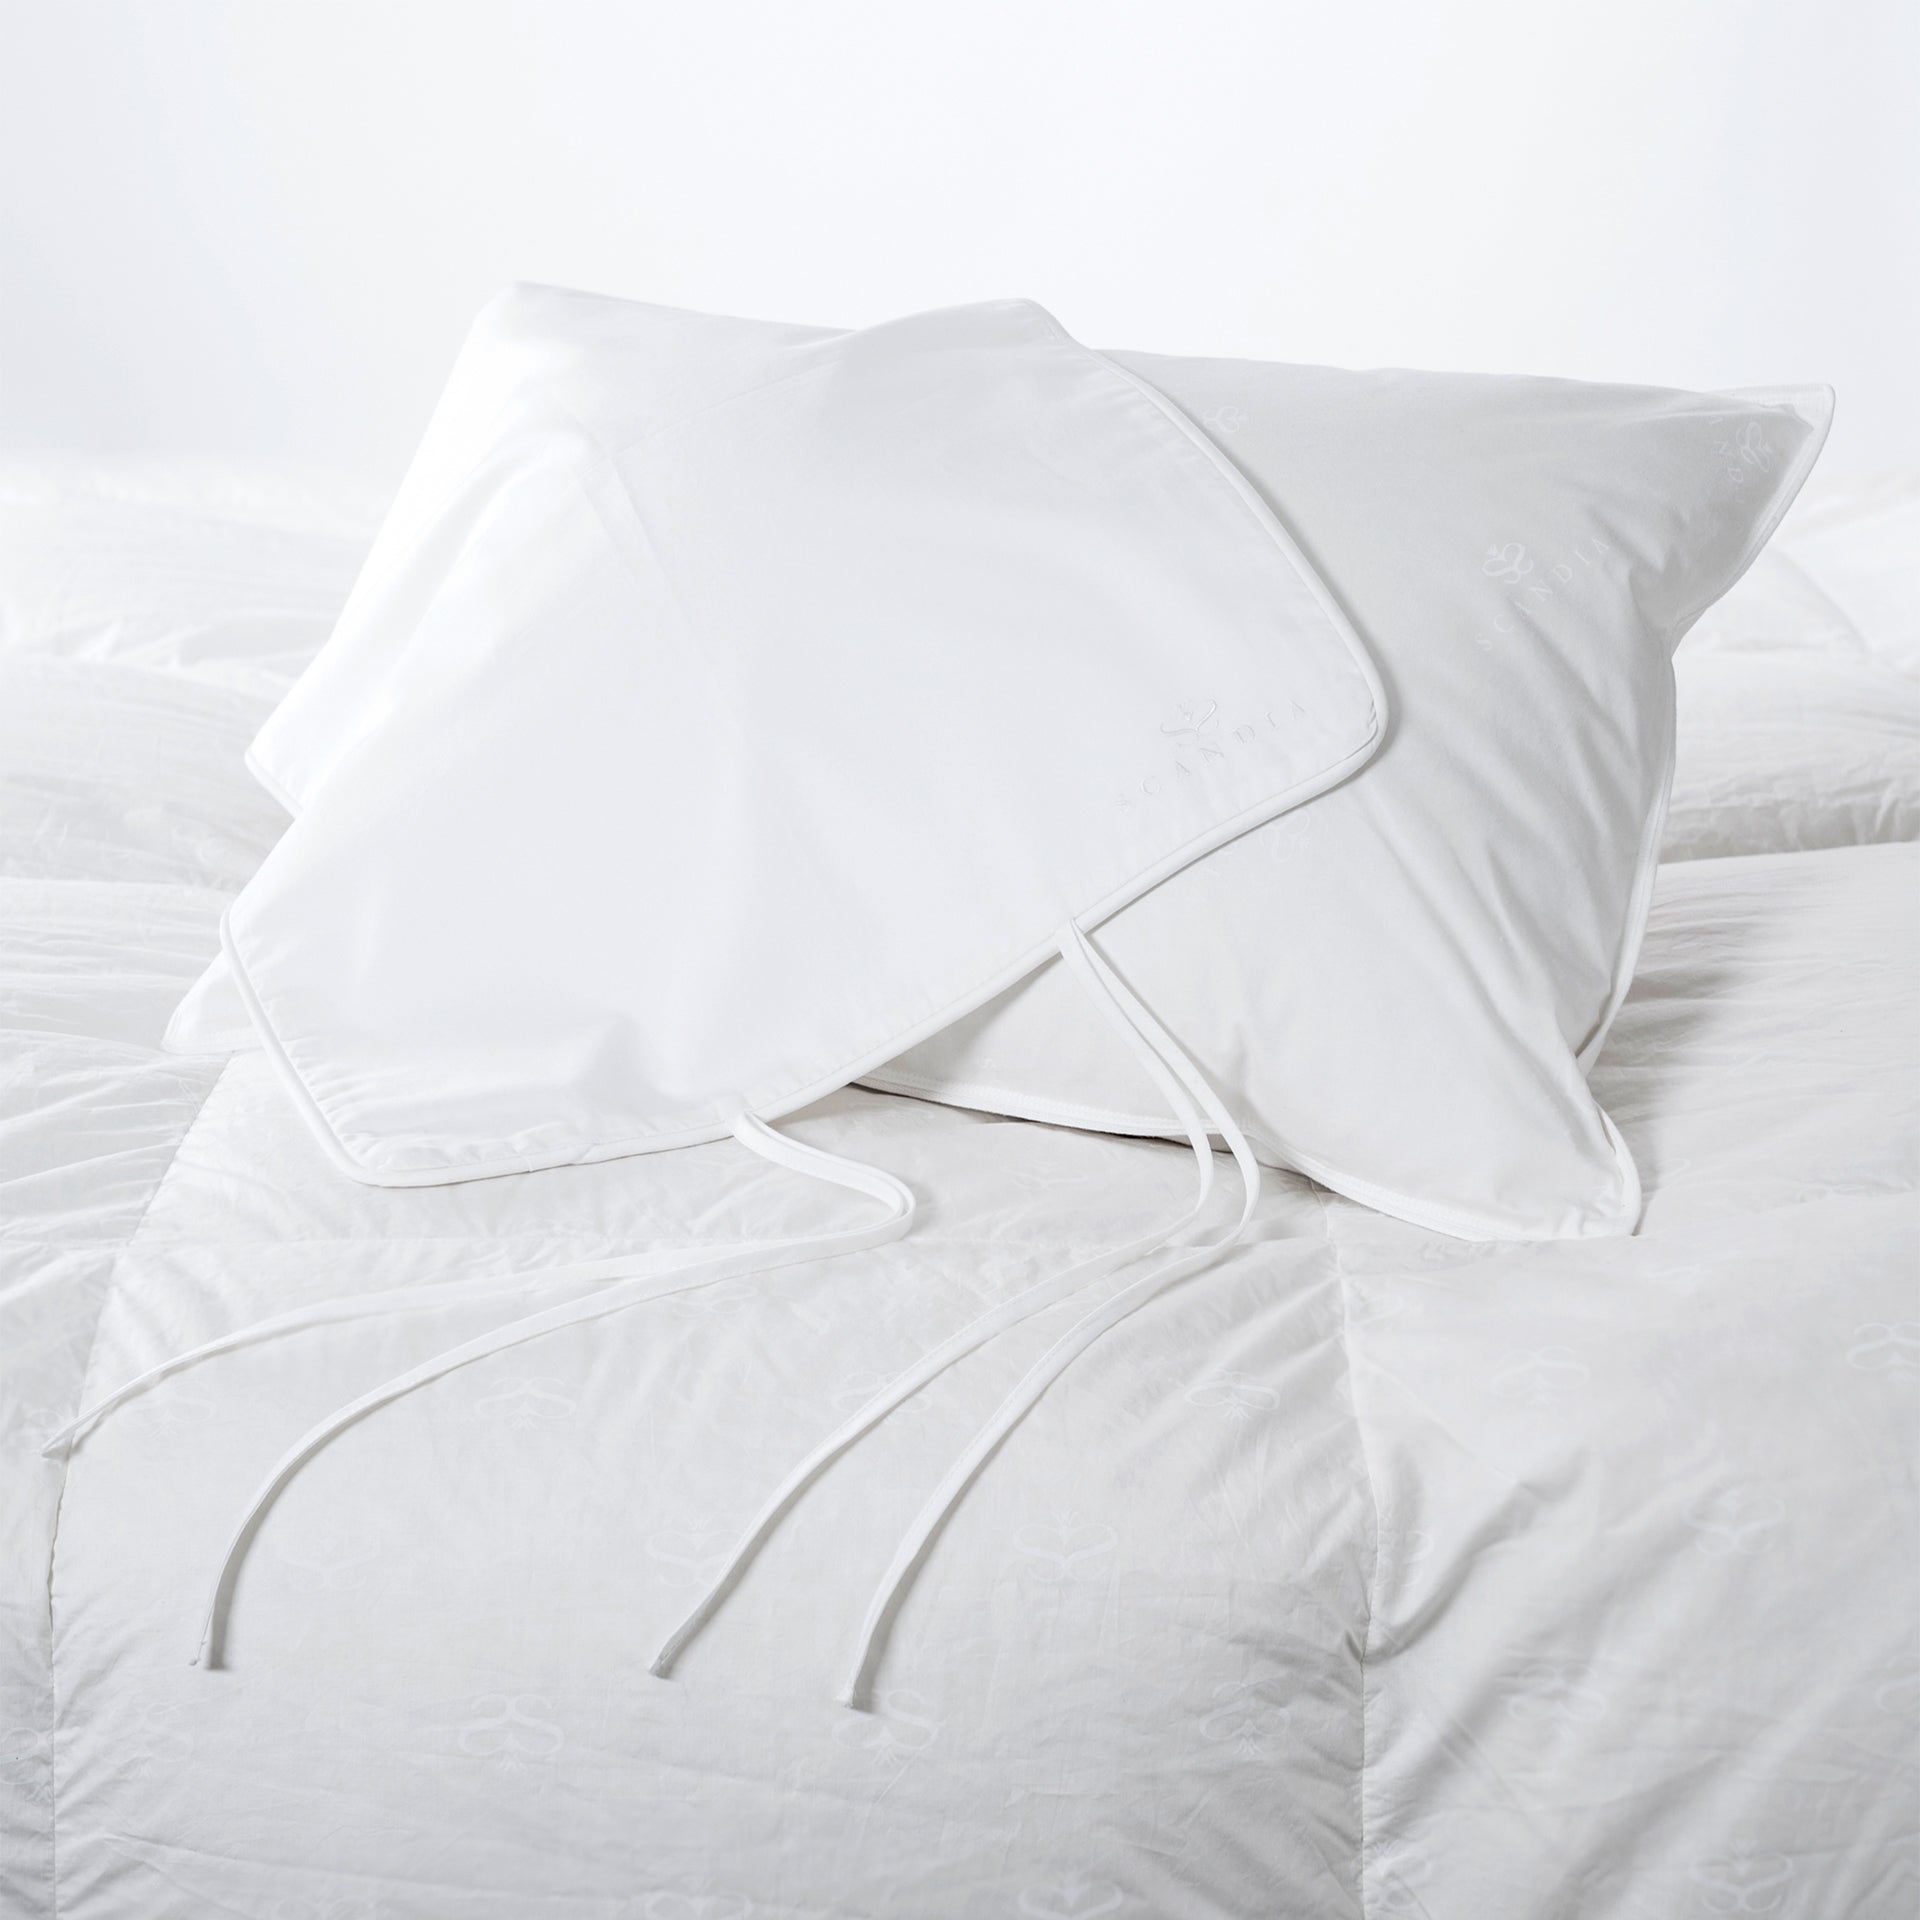 a standard size travel pillow filled with 650 hungarian white goose down with a pillow case made of eygptian cotton